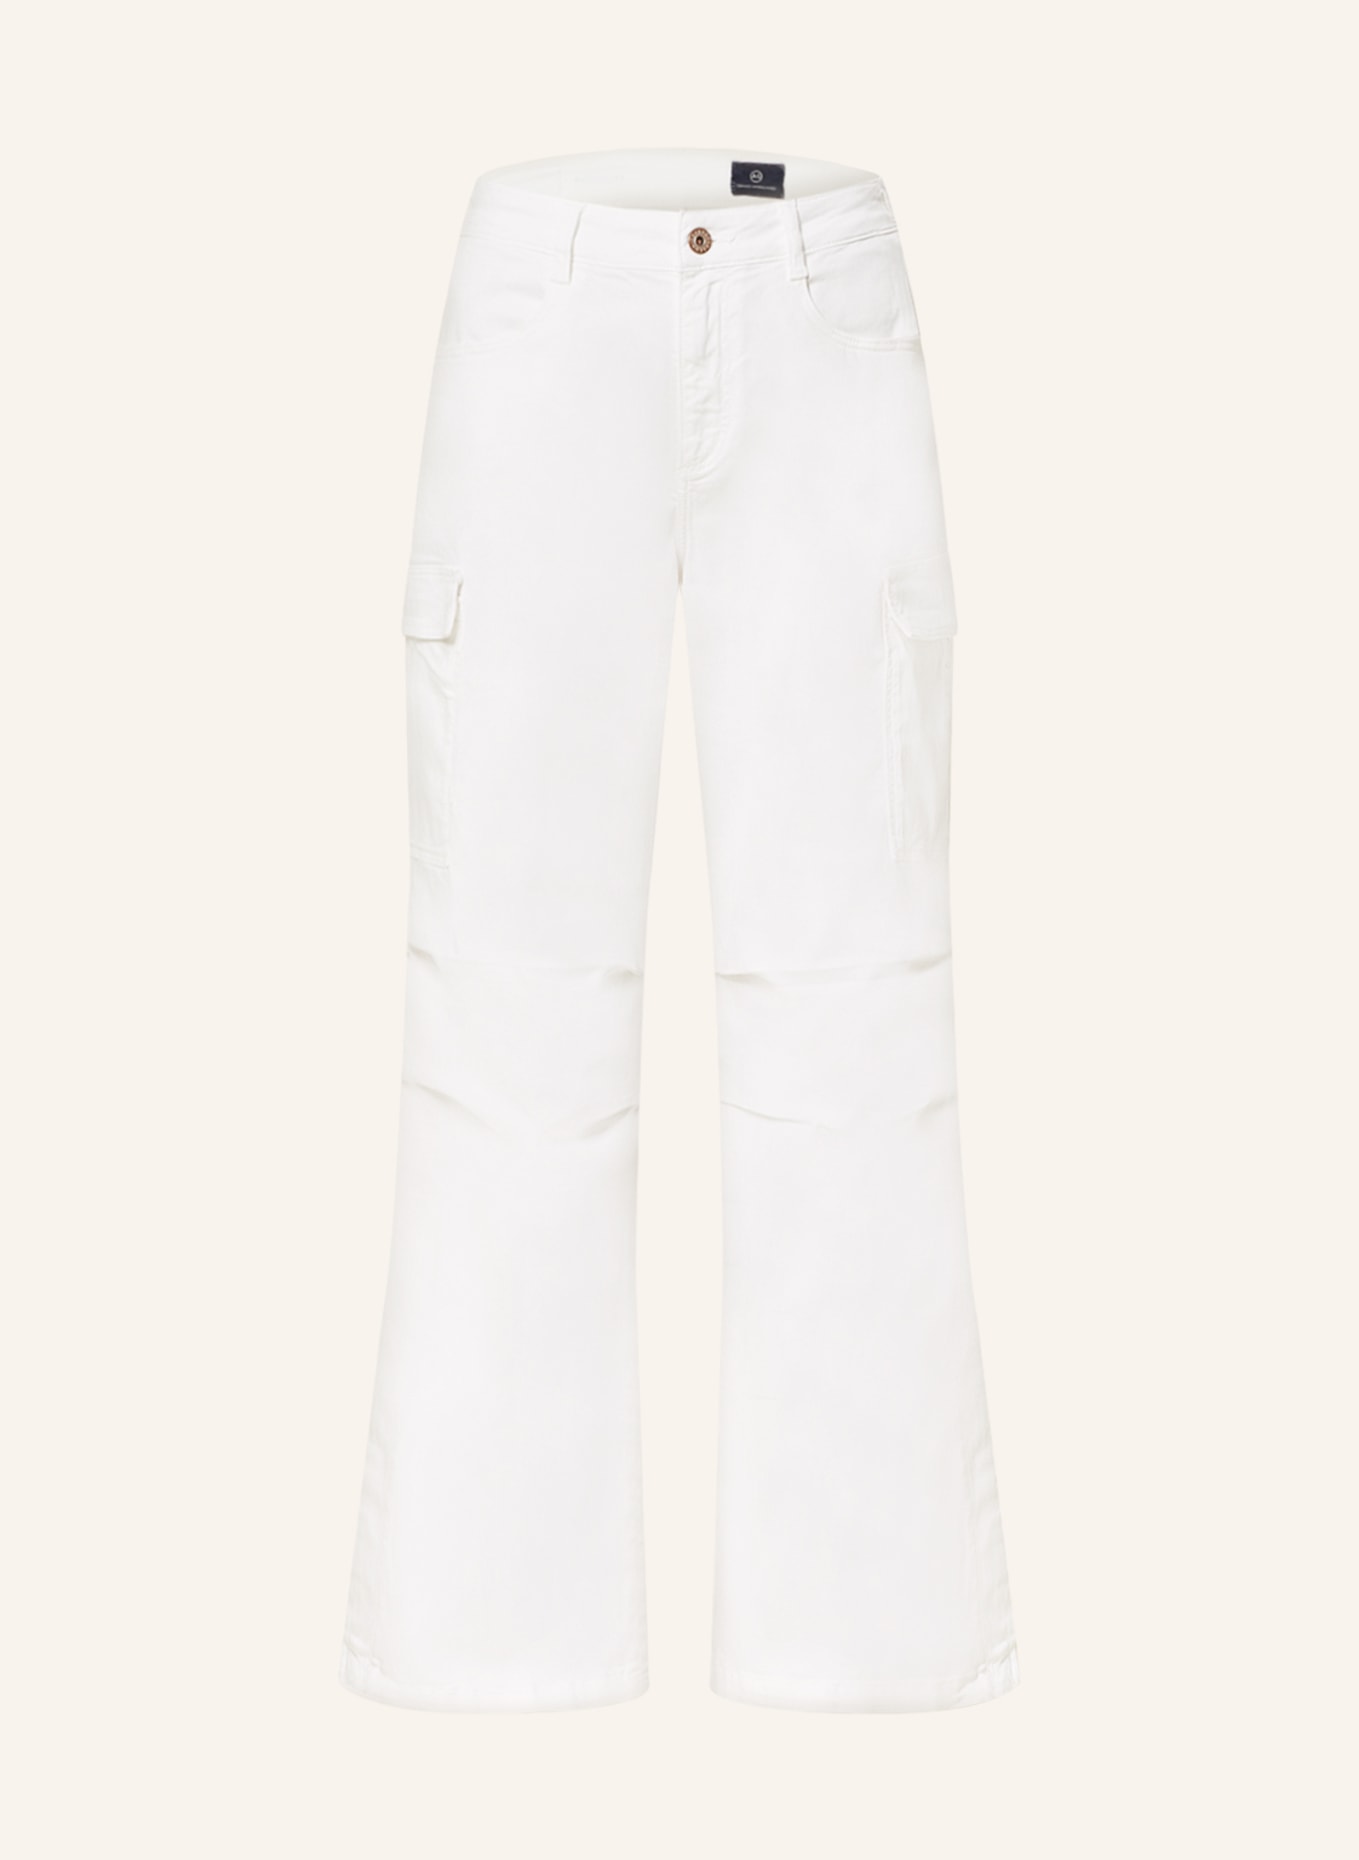 AG Jeans Cargohose PAPERMOON, Farbe: WEISS (Bild 1)